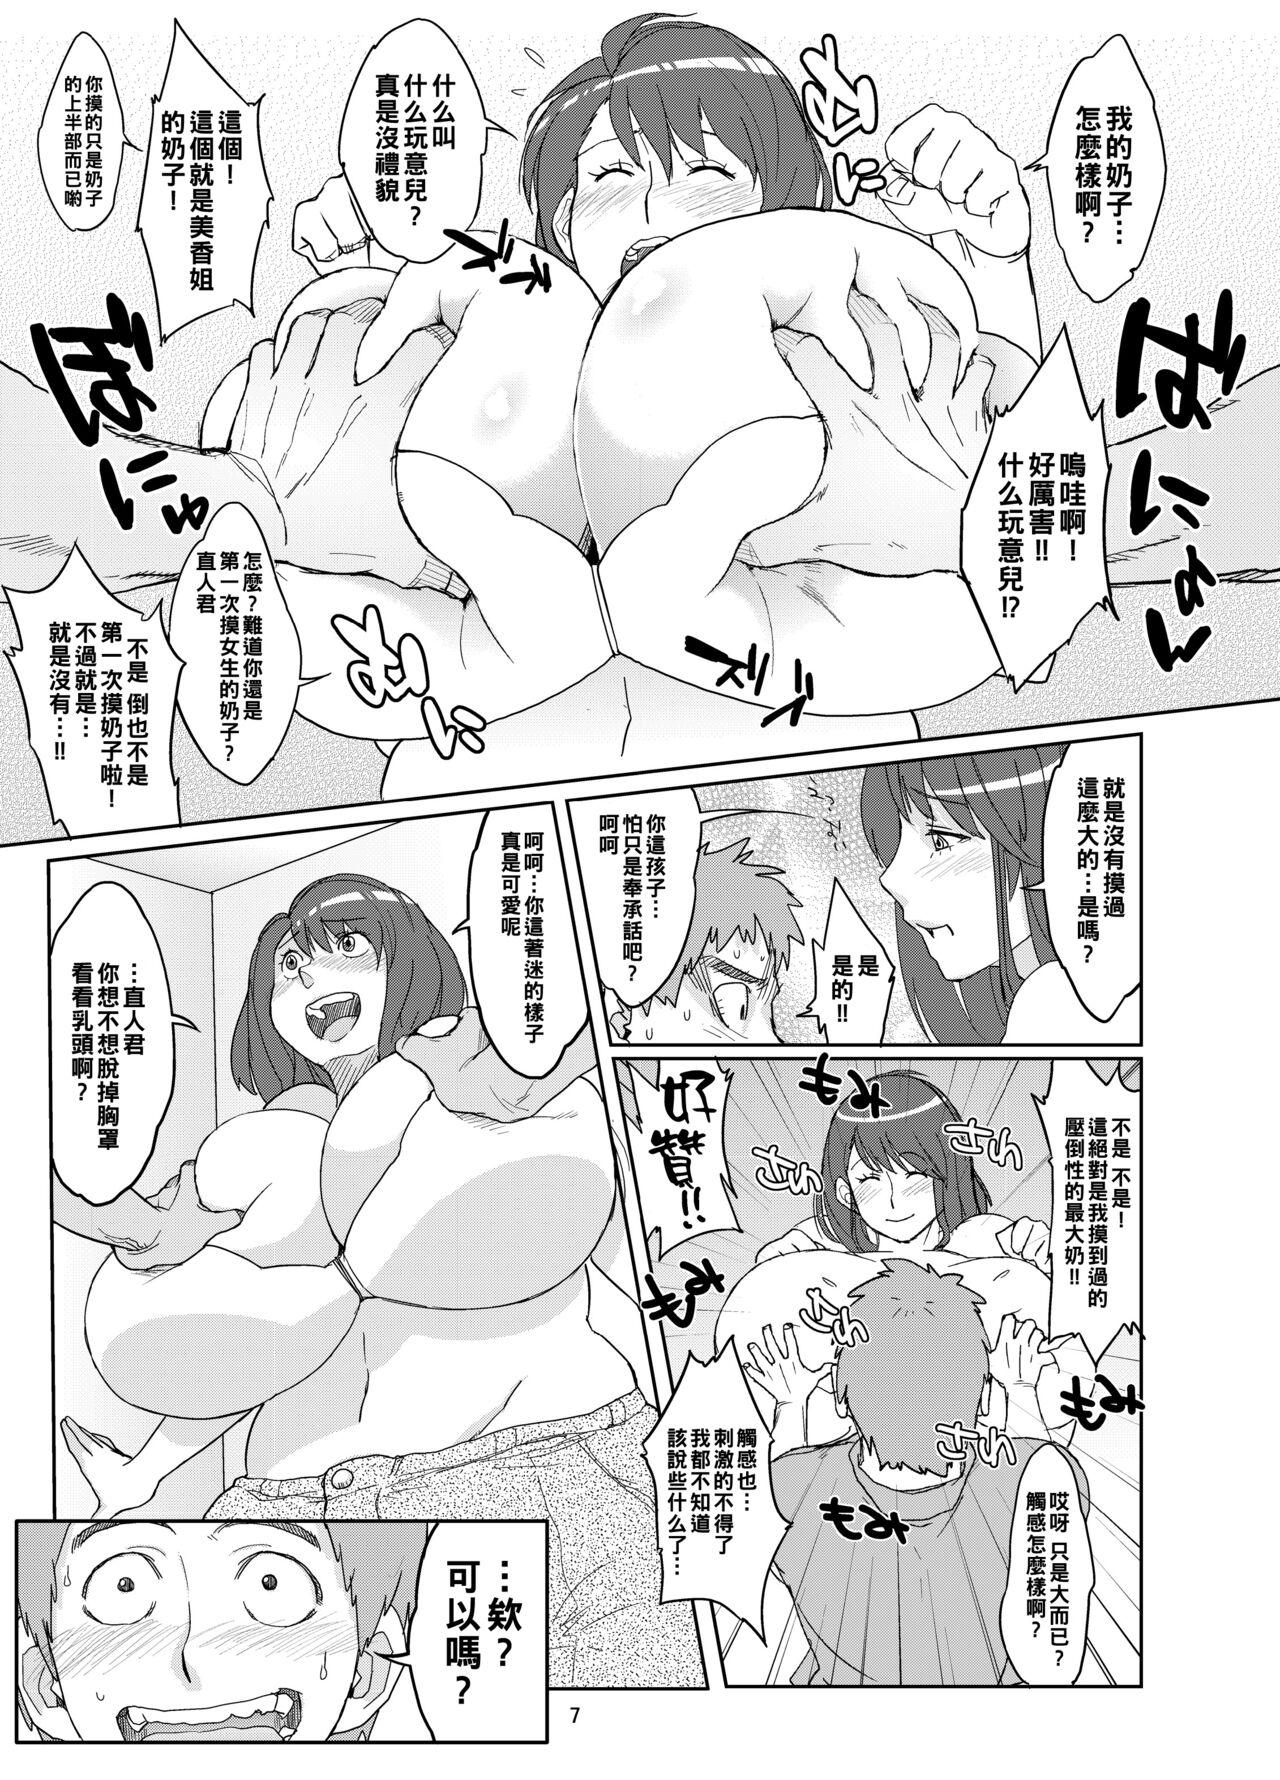 Roleplay Hybrid Tsuushin Vol. 09 - Original Sex Party - Page 7